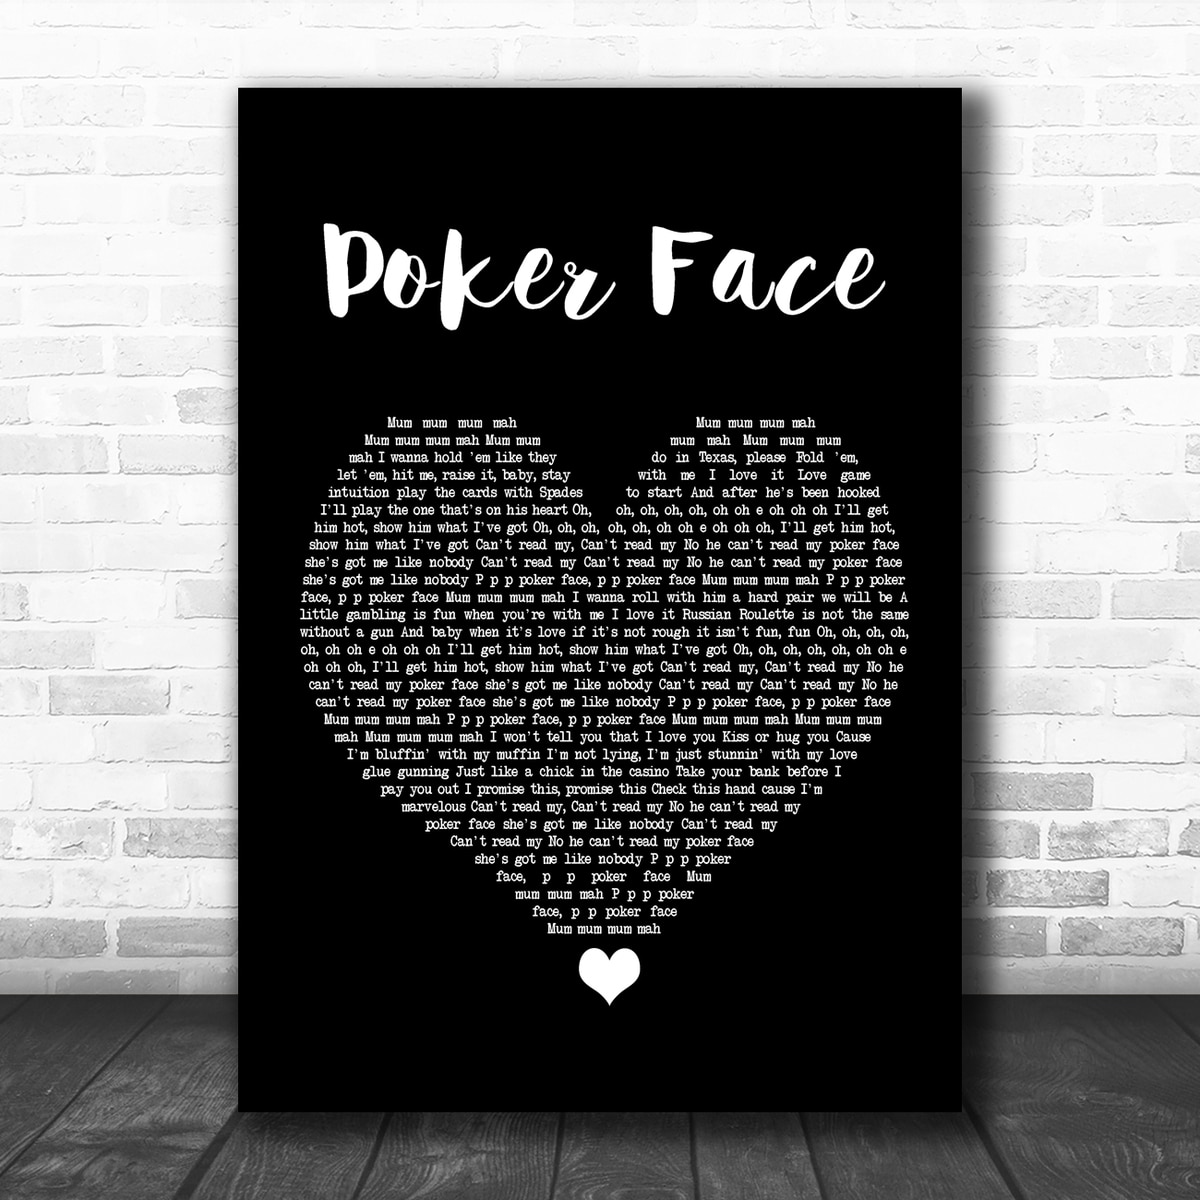 Poker face picture quotes inspirational